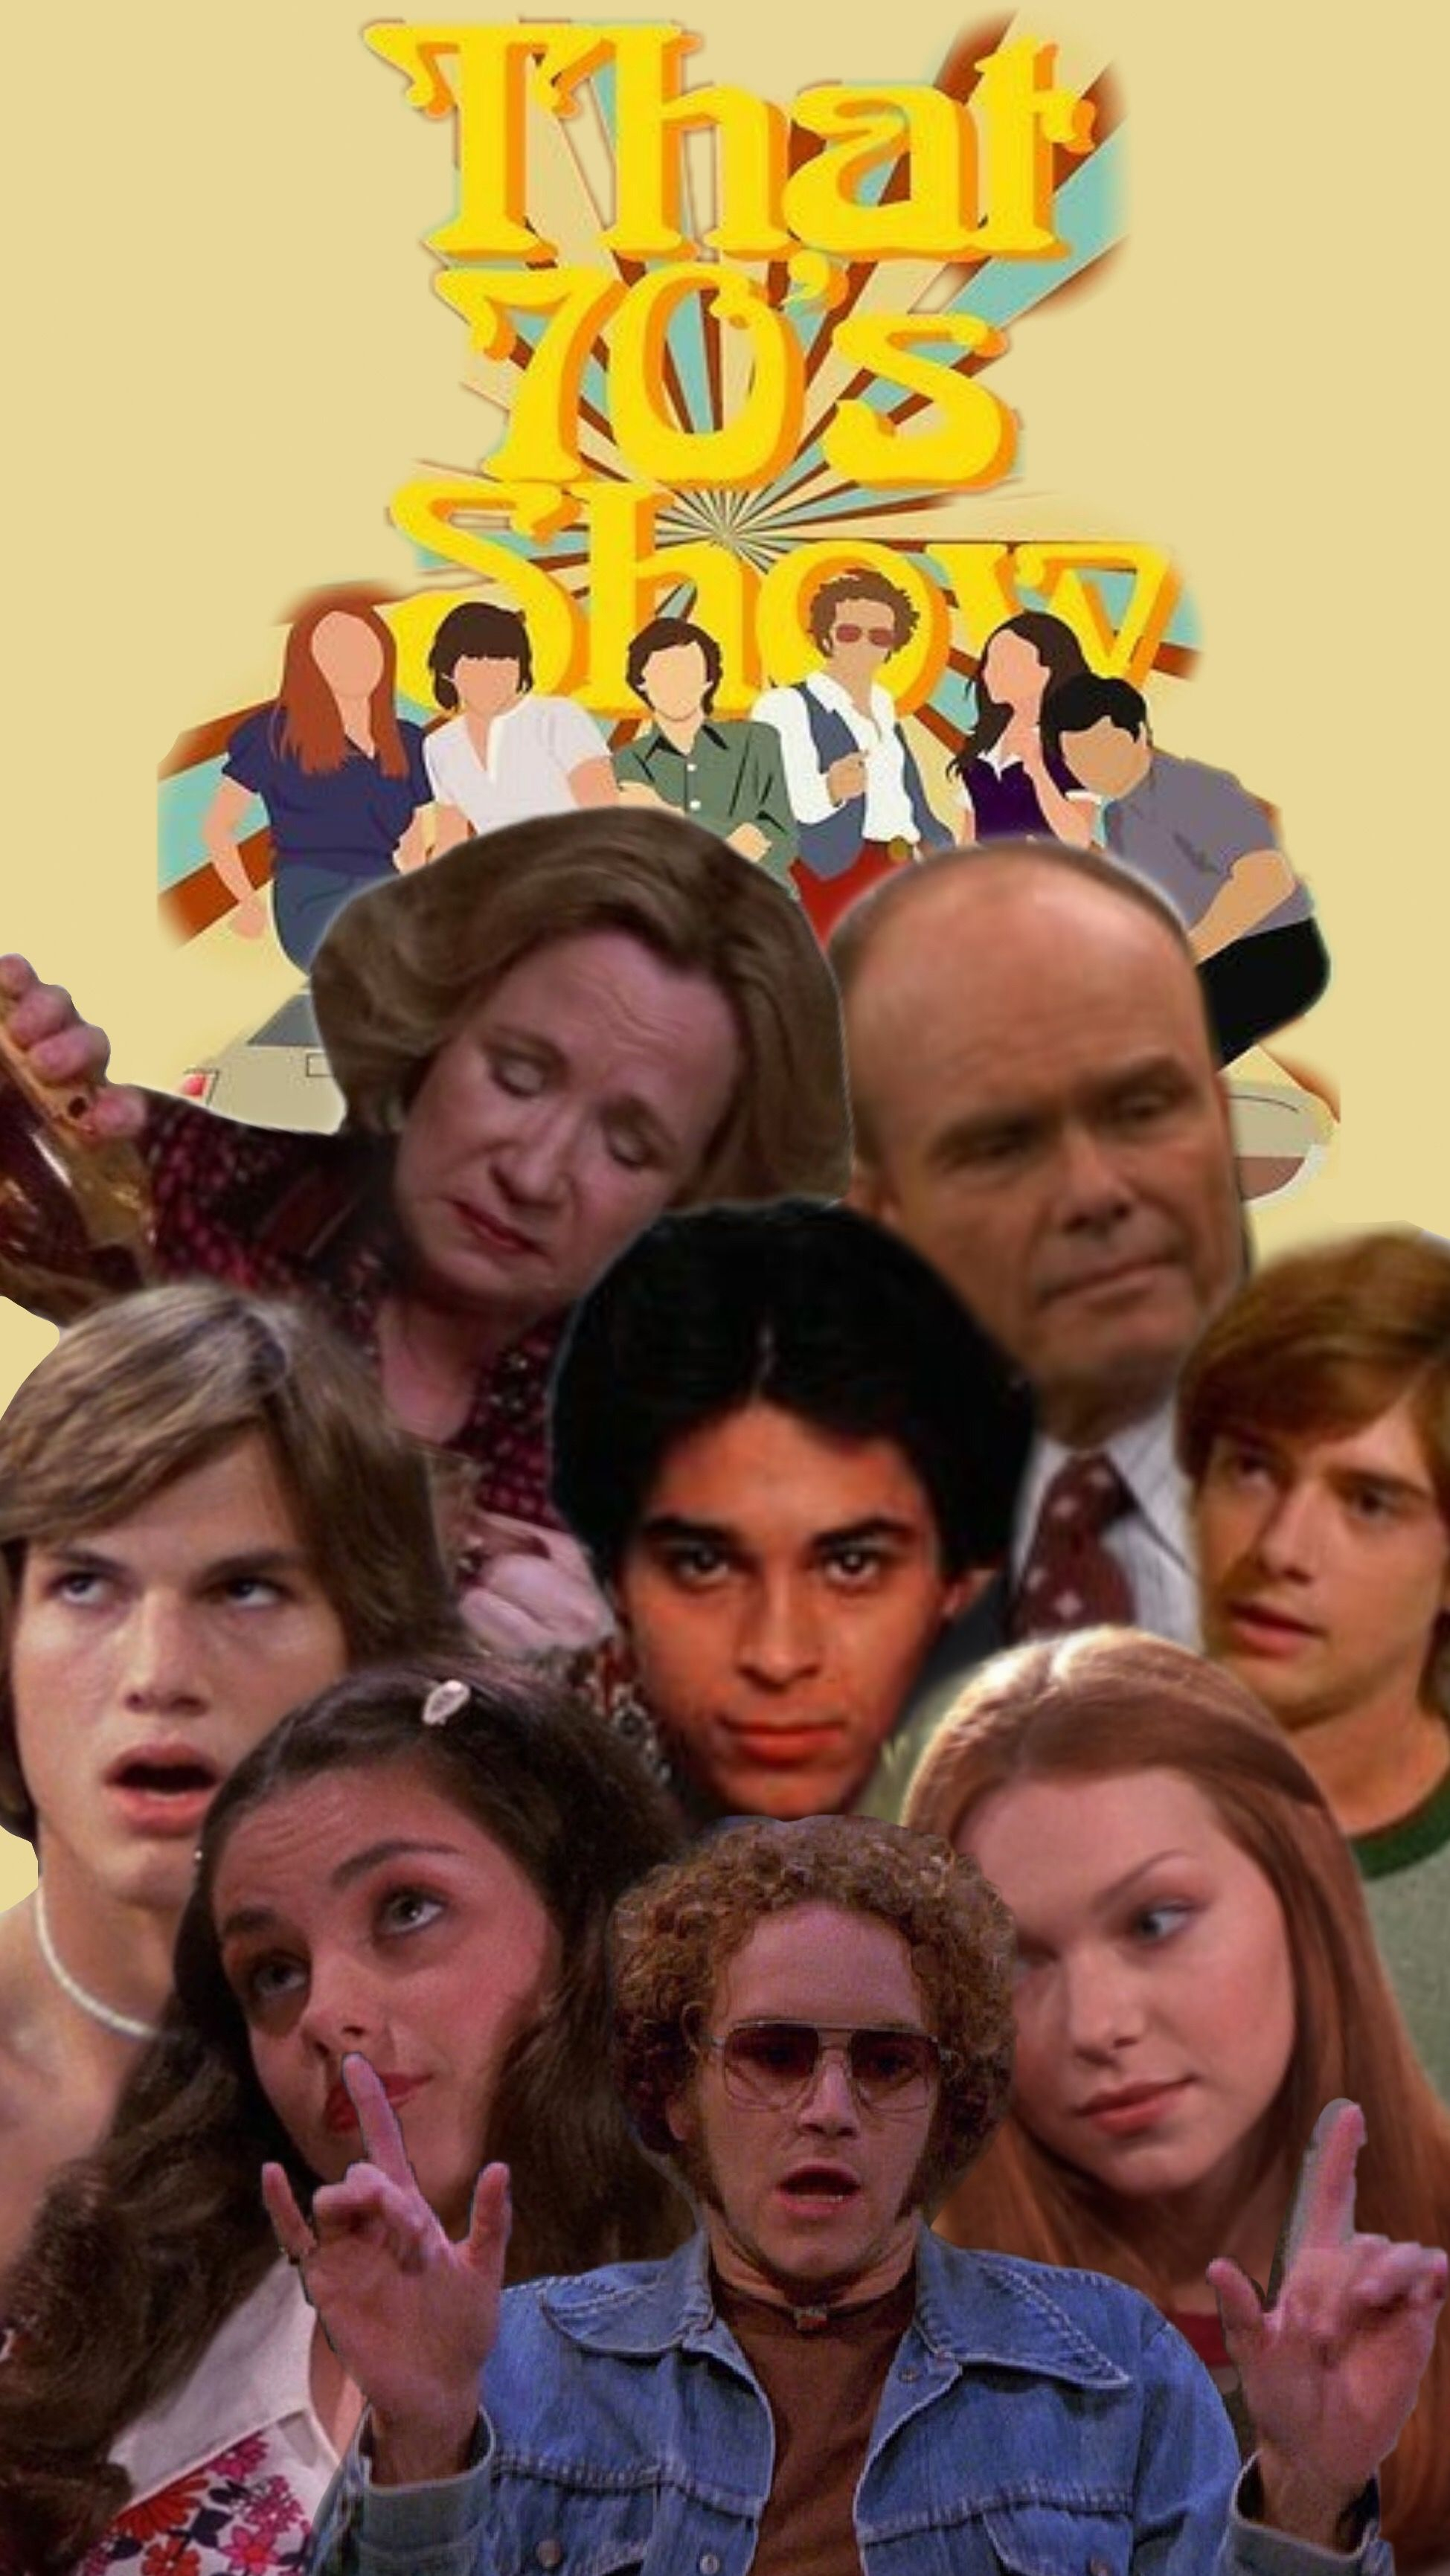 1949x3463 That 70's show wallpaper | That 70s show, 70 show, That 70s show aesthetic